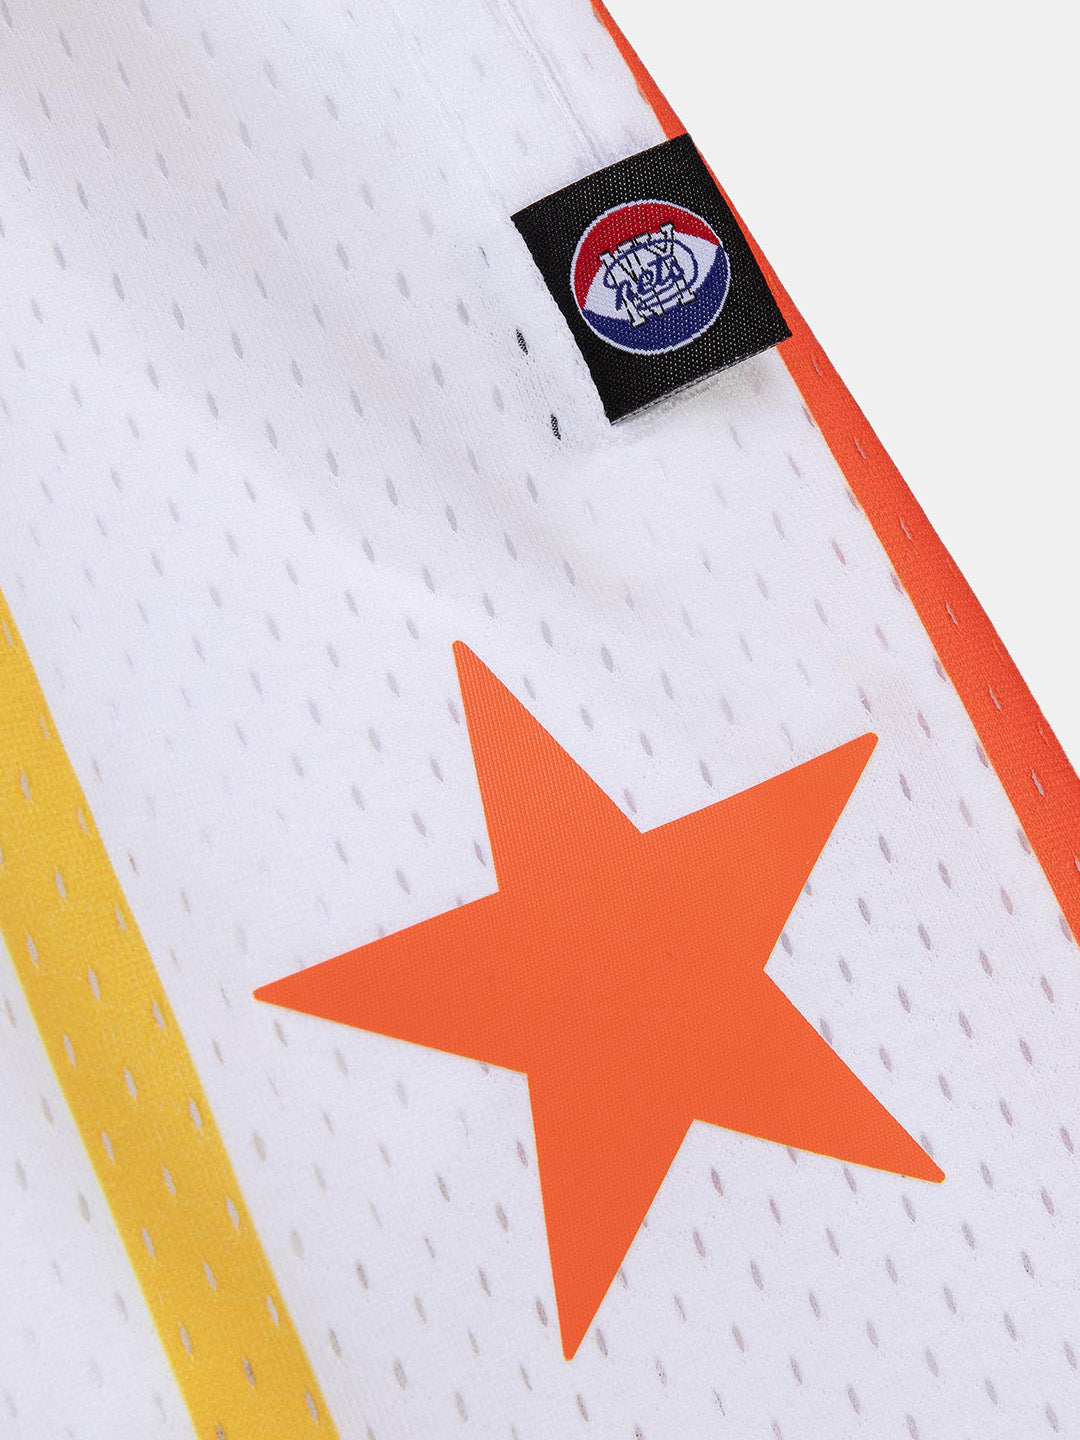 UNINTERRUPTED X Mitchell & Ness Legends Shorts Nets - close up of the stars detail and nets logo tag